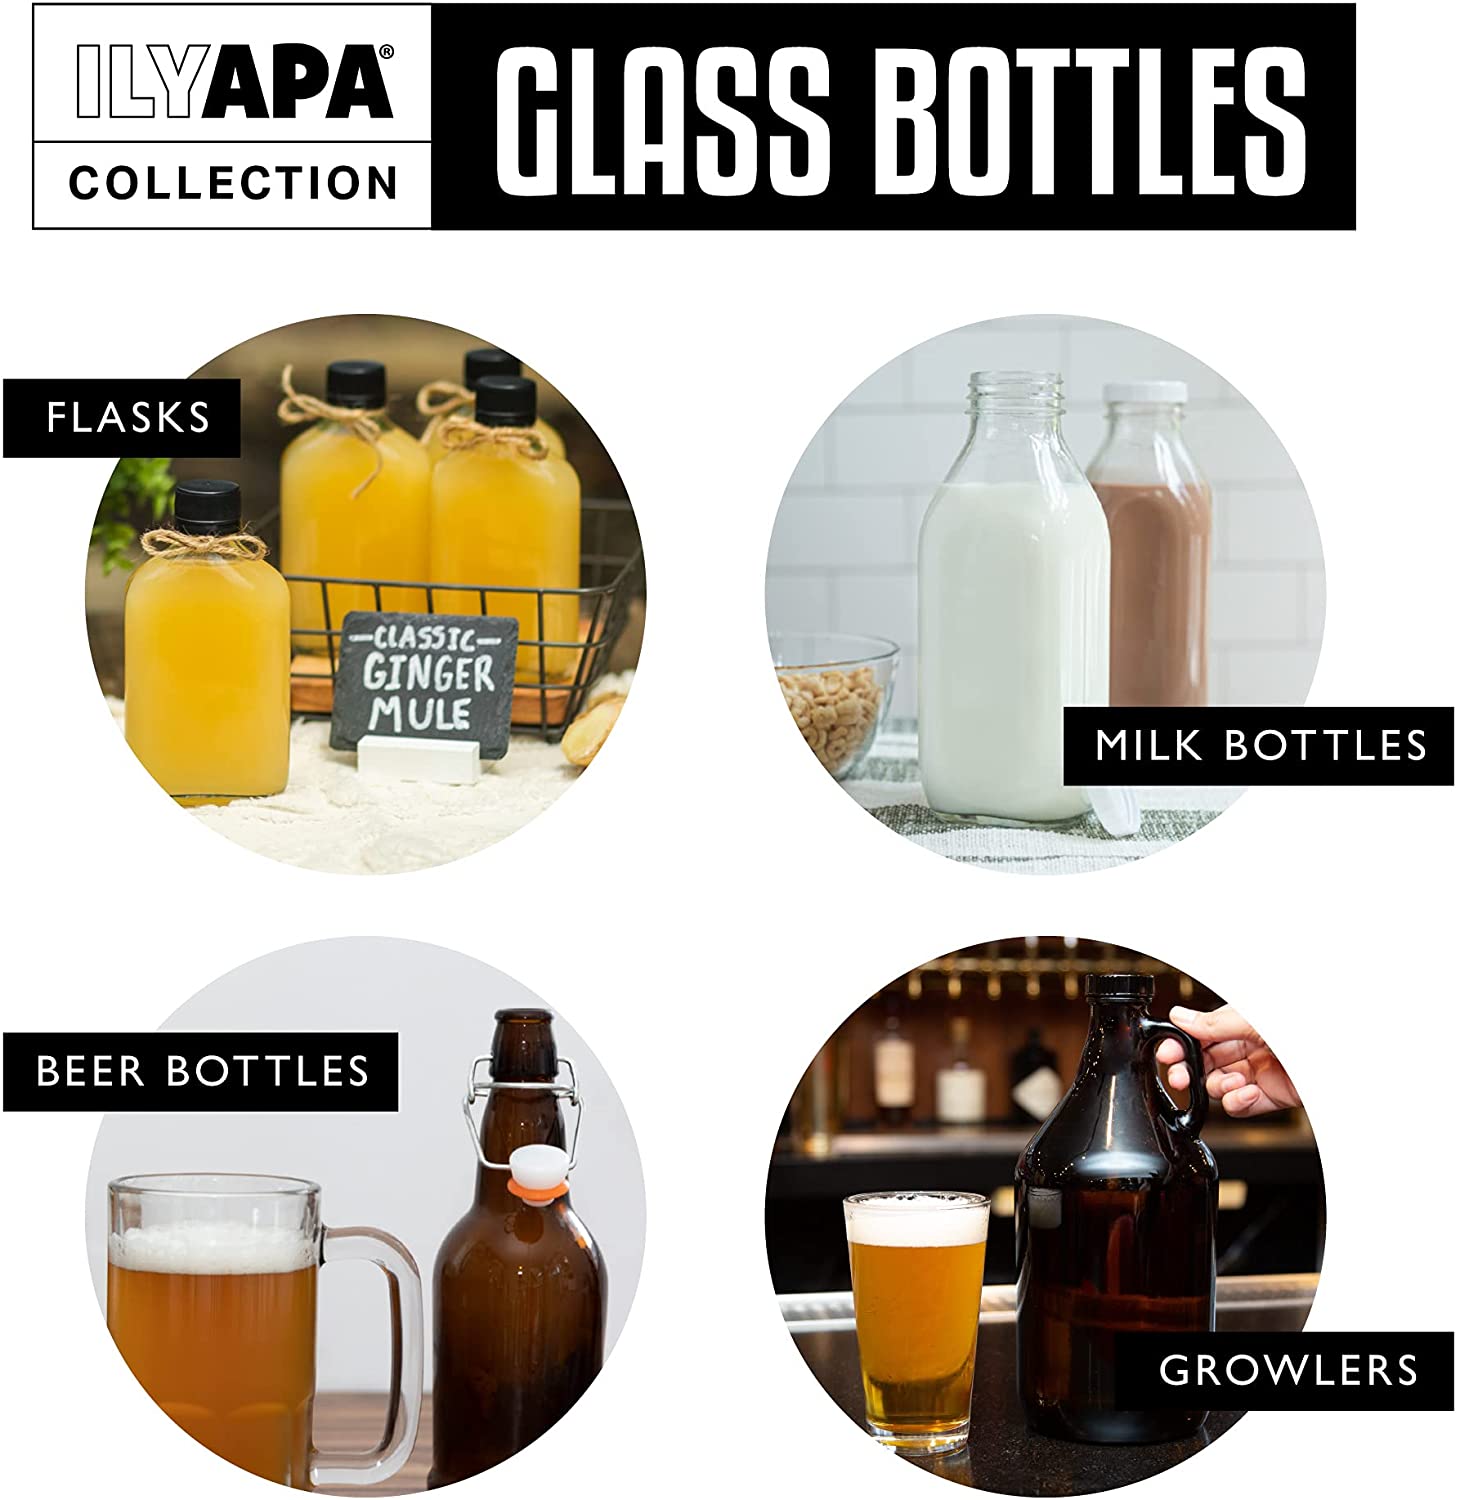 200ml Clear Glass Flask Bottles Wholesale - Ampulla Packaging